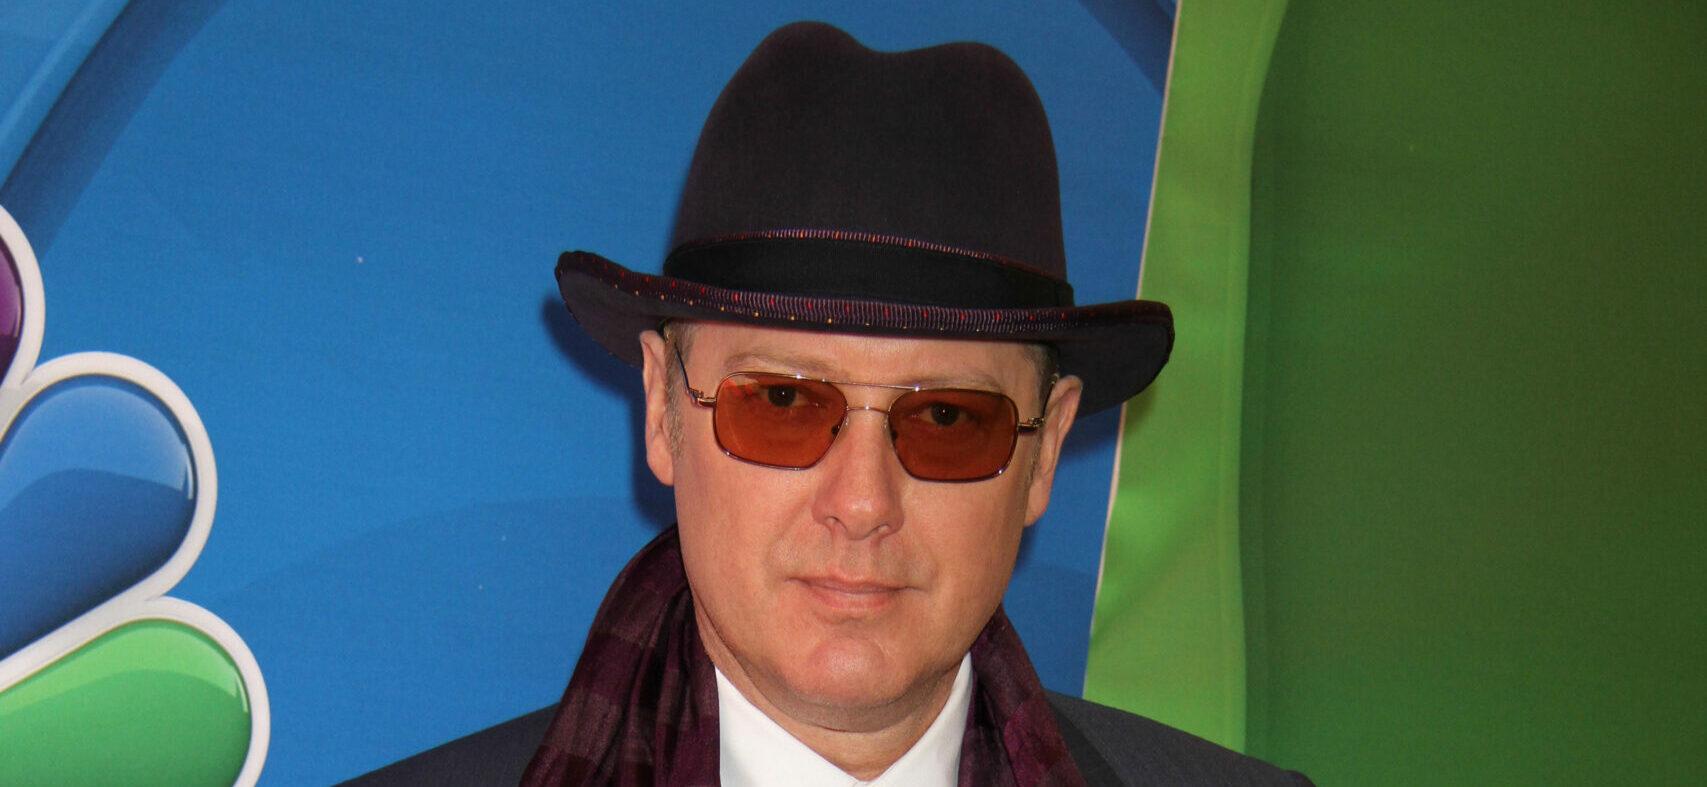 ‘The Blacklist’ Renewed For Another Season